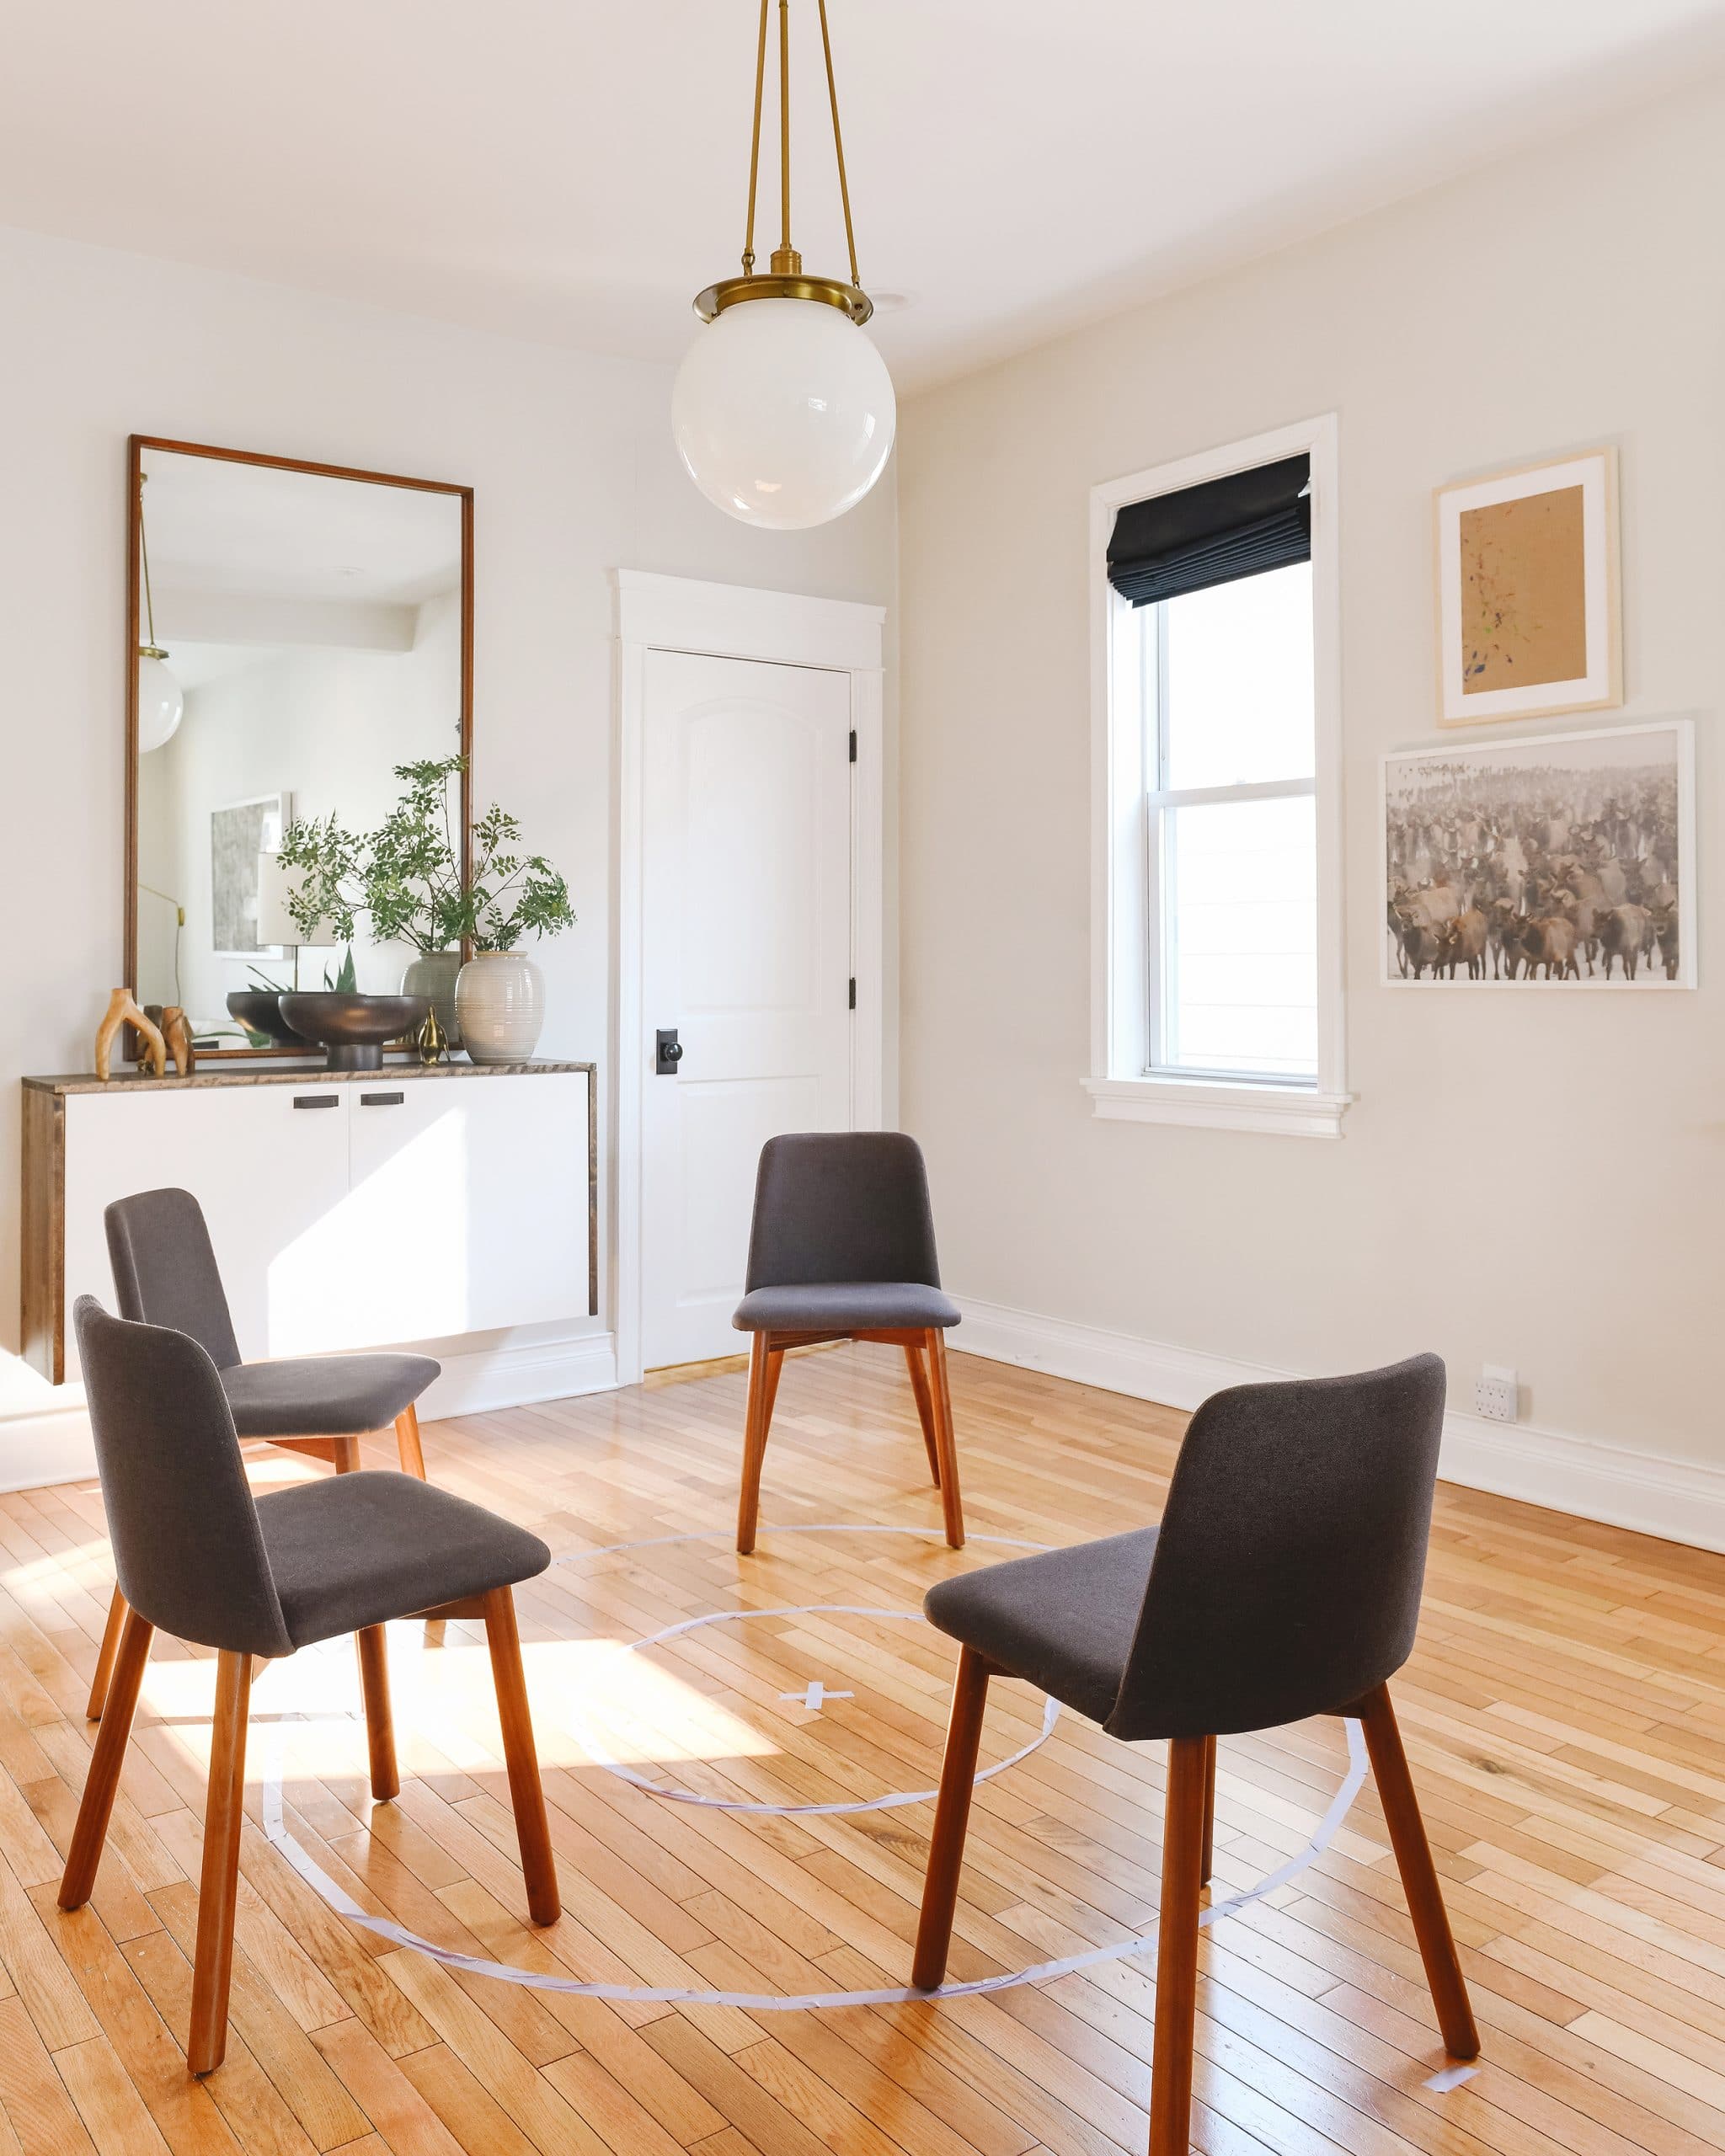 our dining room, in the midst of planning for a round table | via Yellow Brick Home